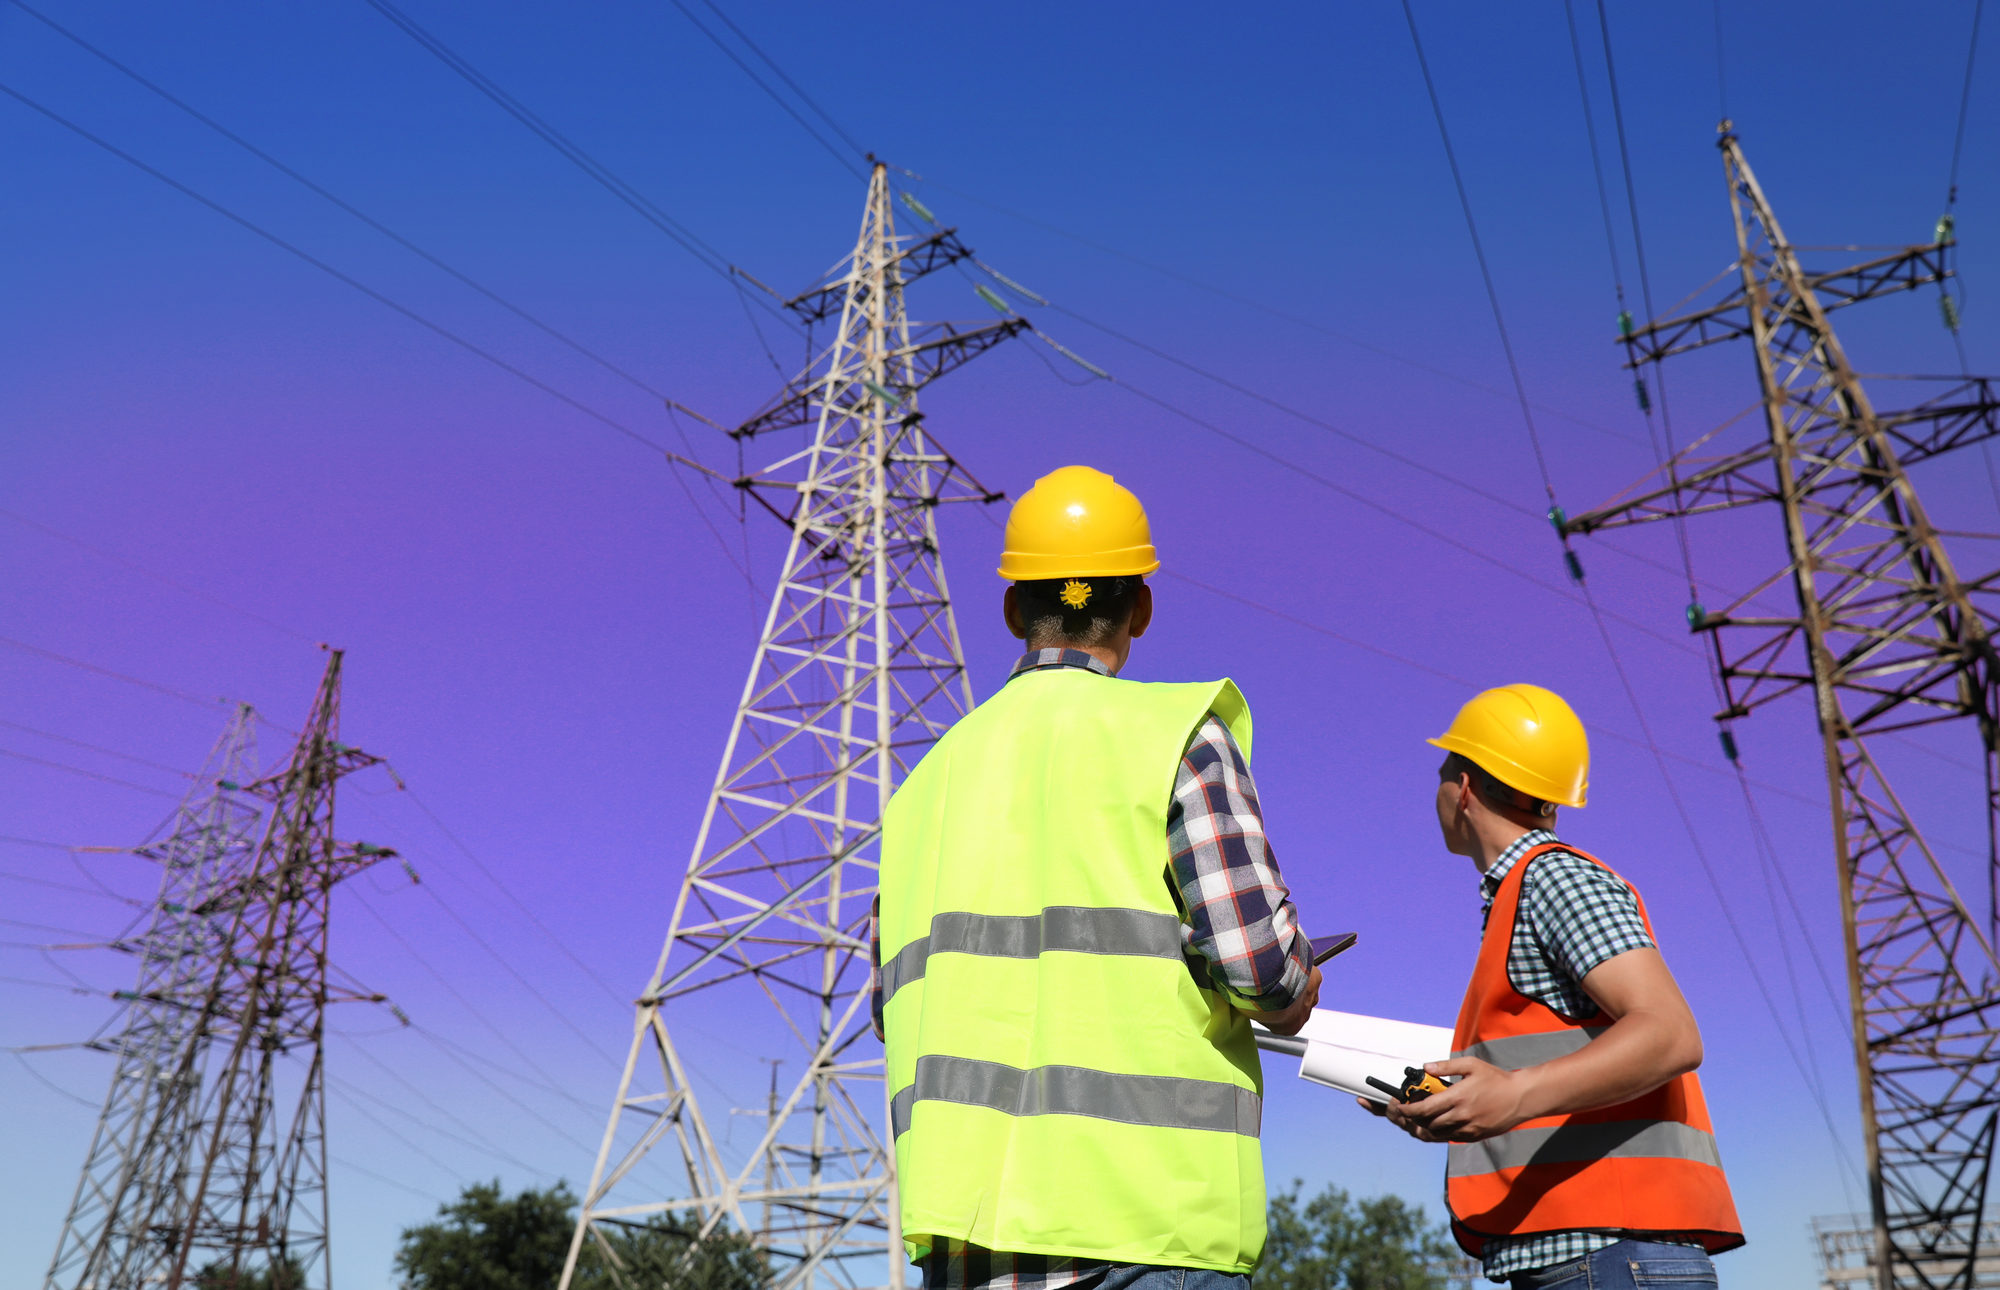 Two professional electricians in neon vests and hardhats look up at electrical towers and lines against a blue sky.